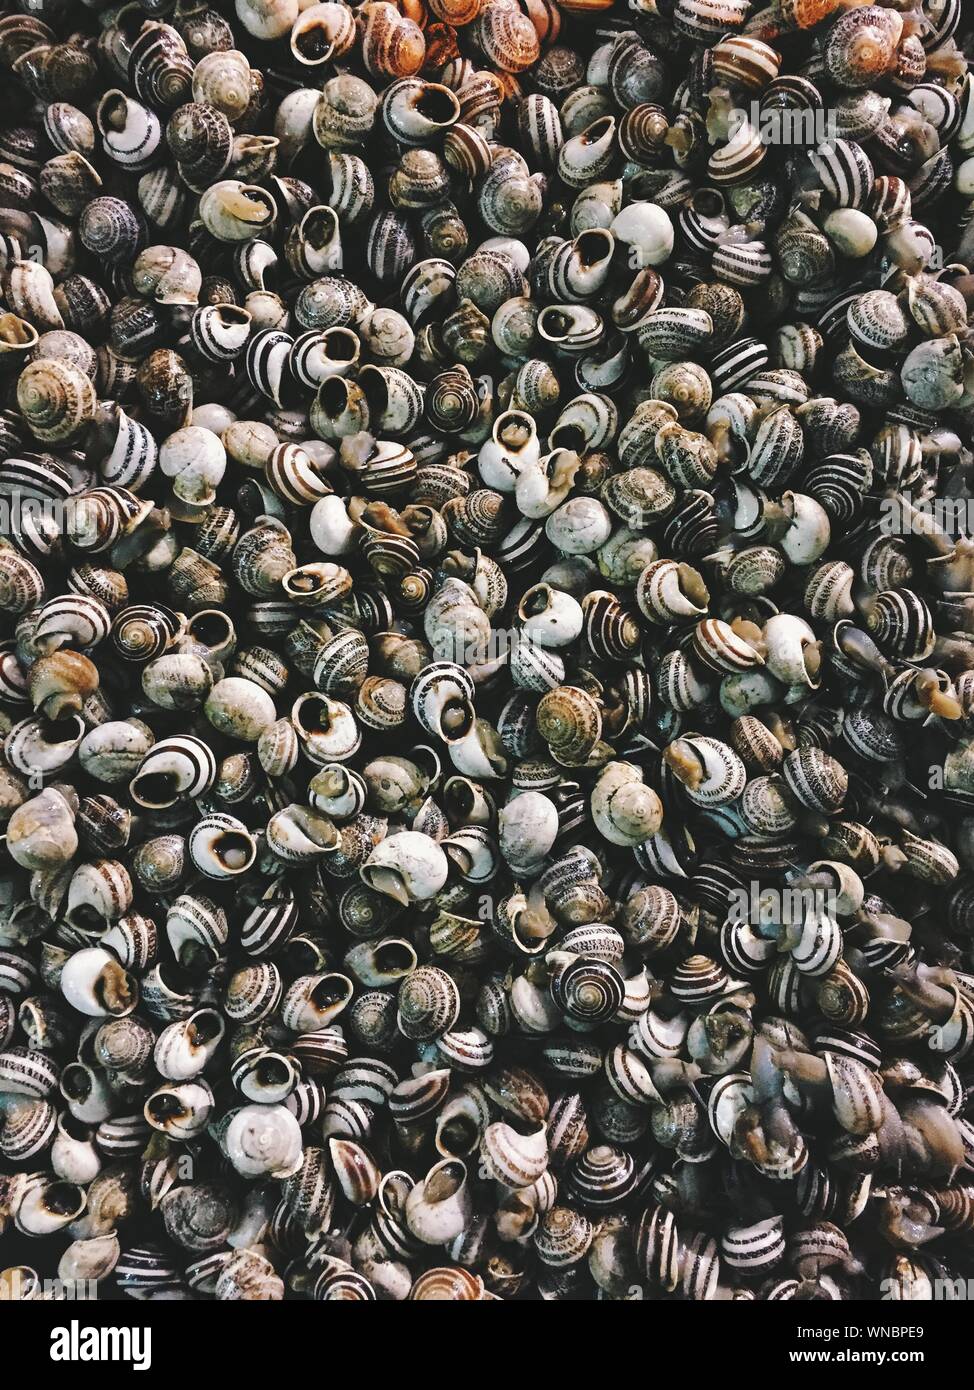 Pile Of Snails Stock Photo